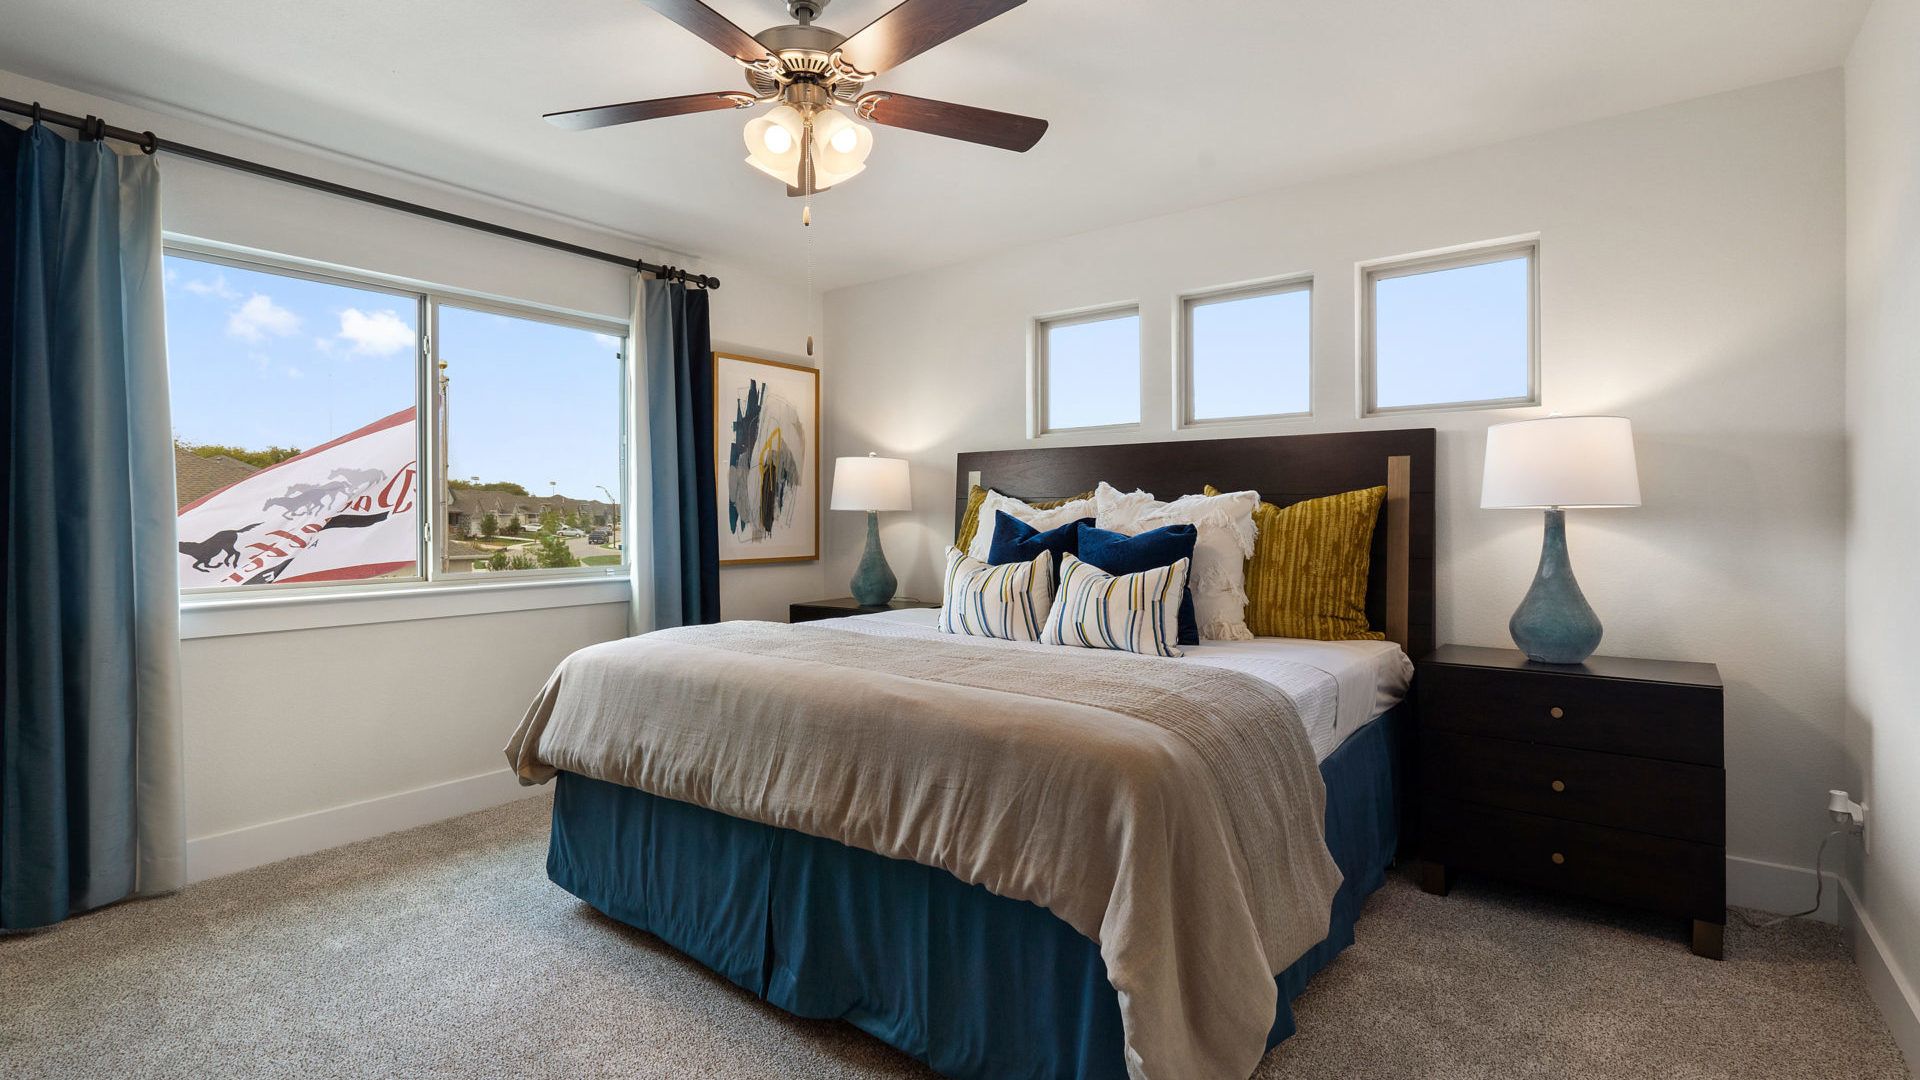 Saddle Creek Twinhomes new homes in Georgetown, TX